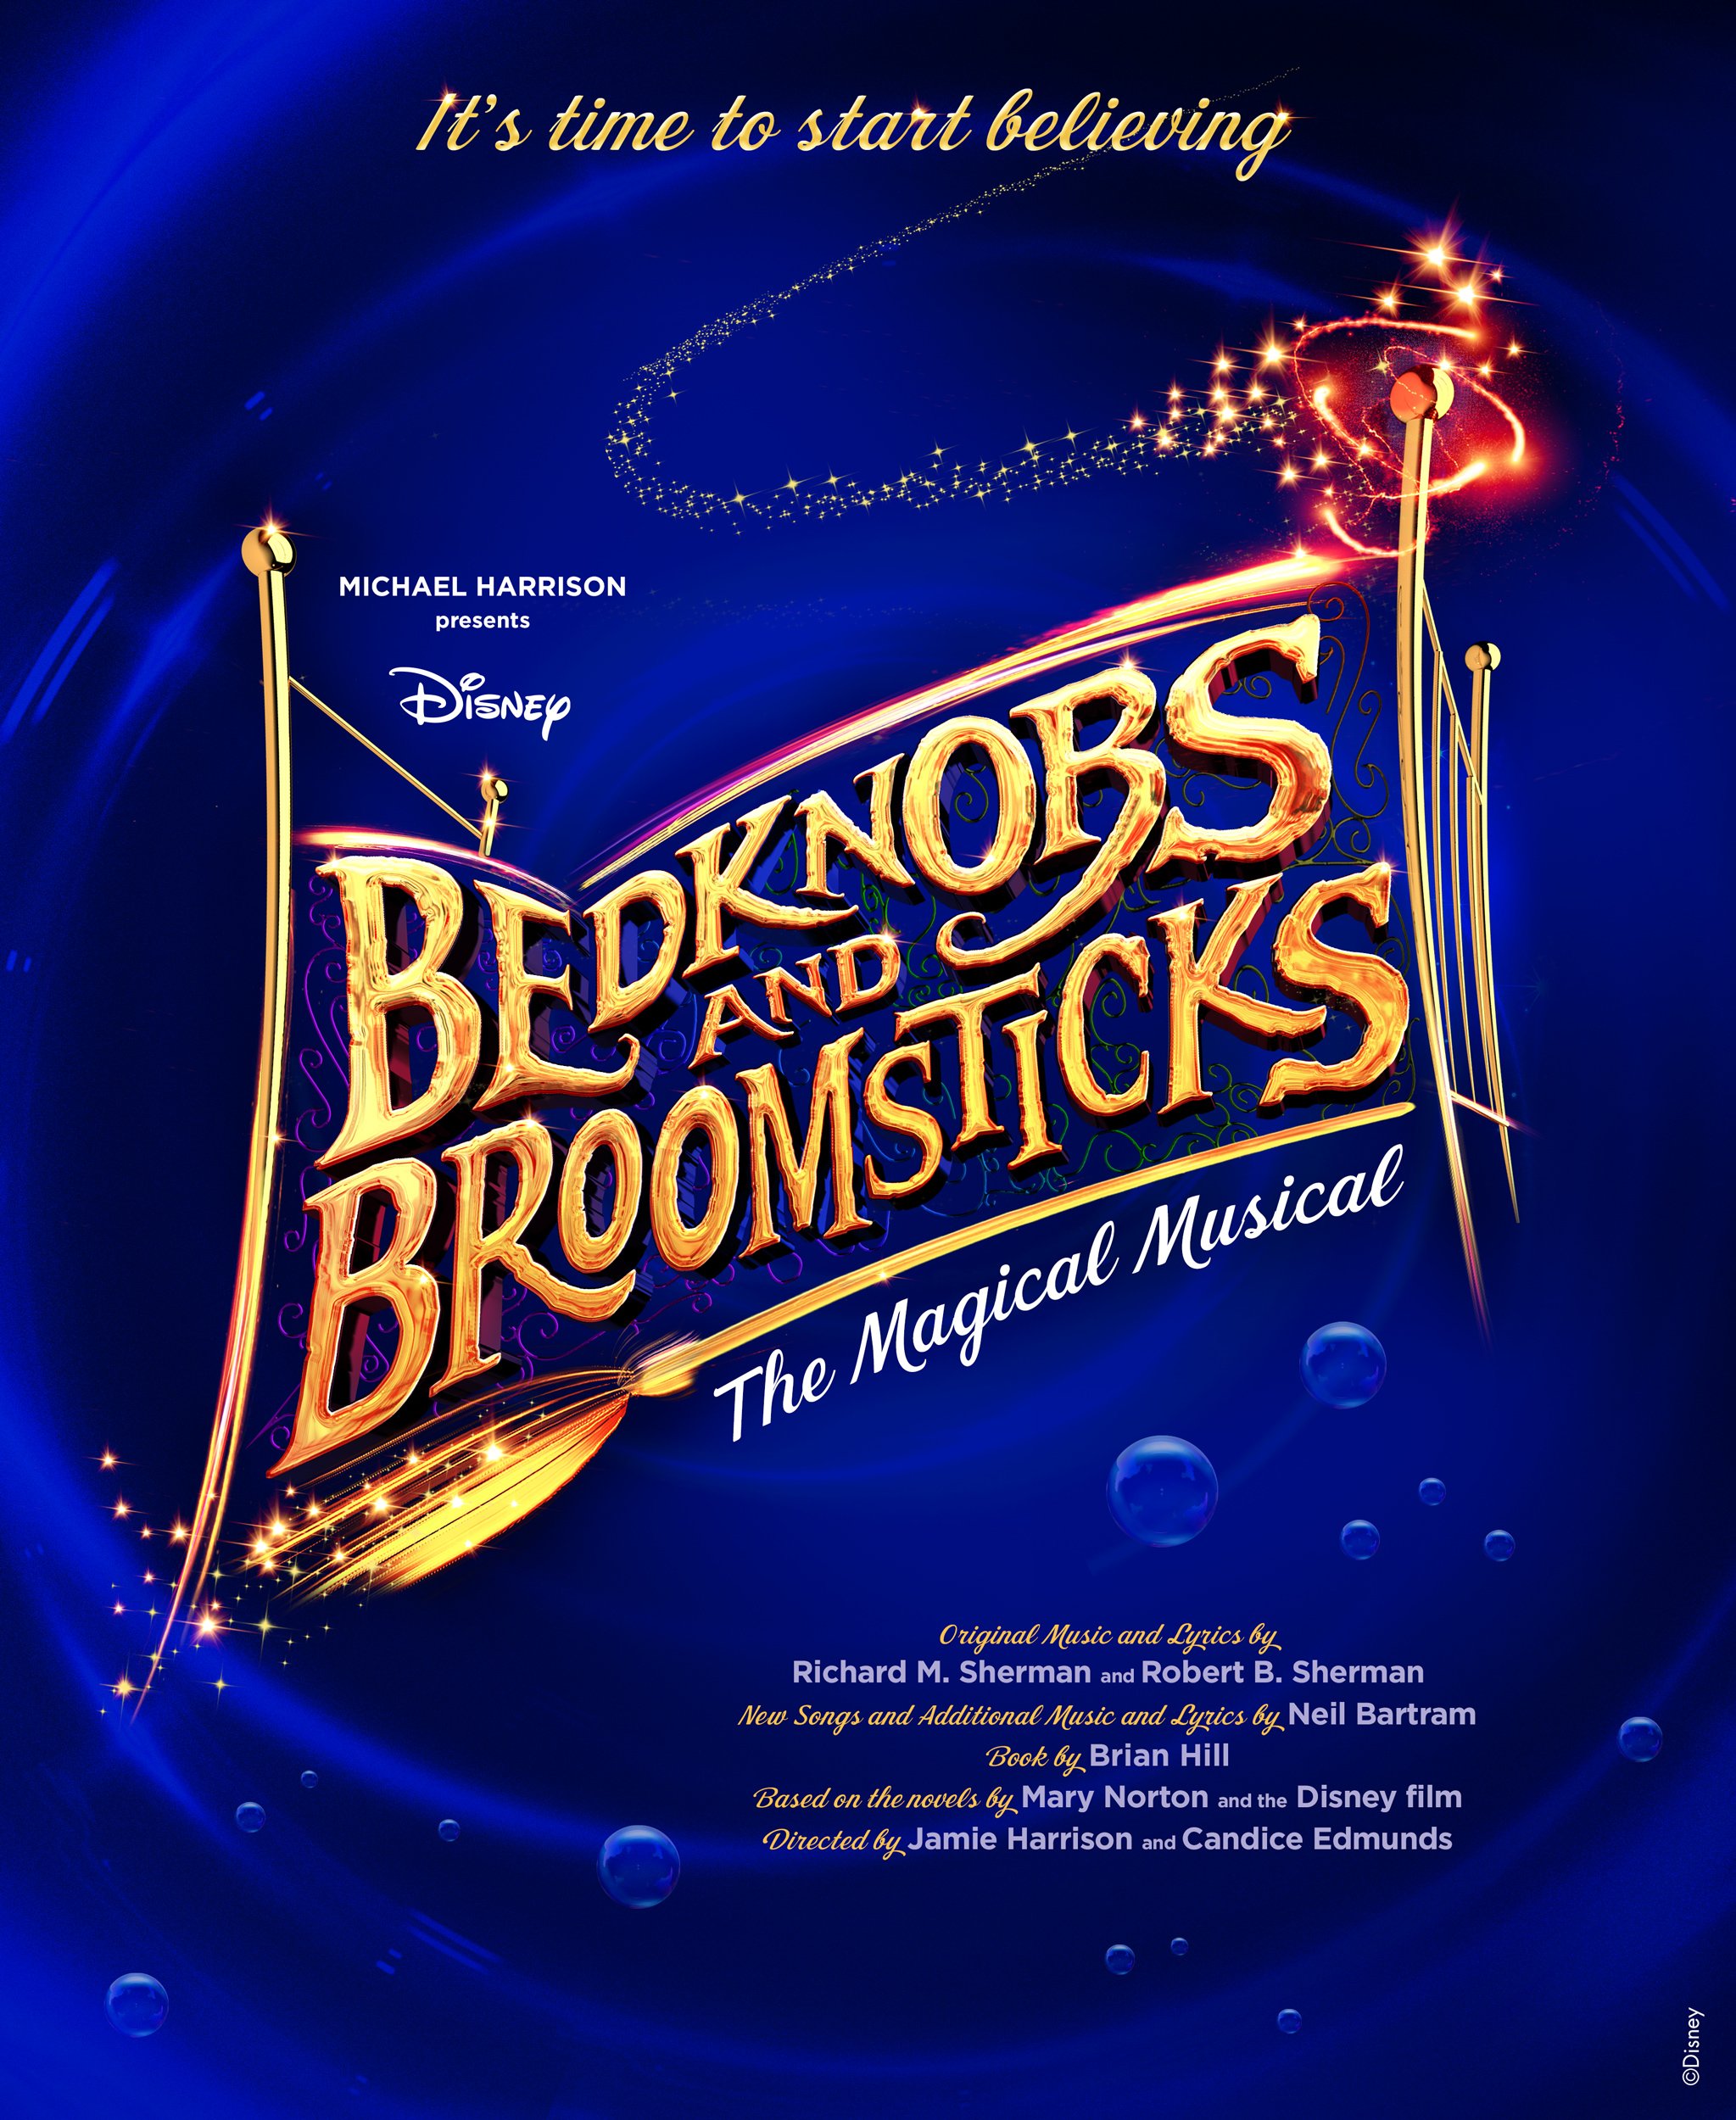 Bedknobs and Broomsticks is coming to Milton Keynes Theatre